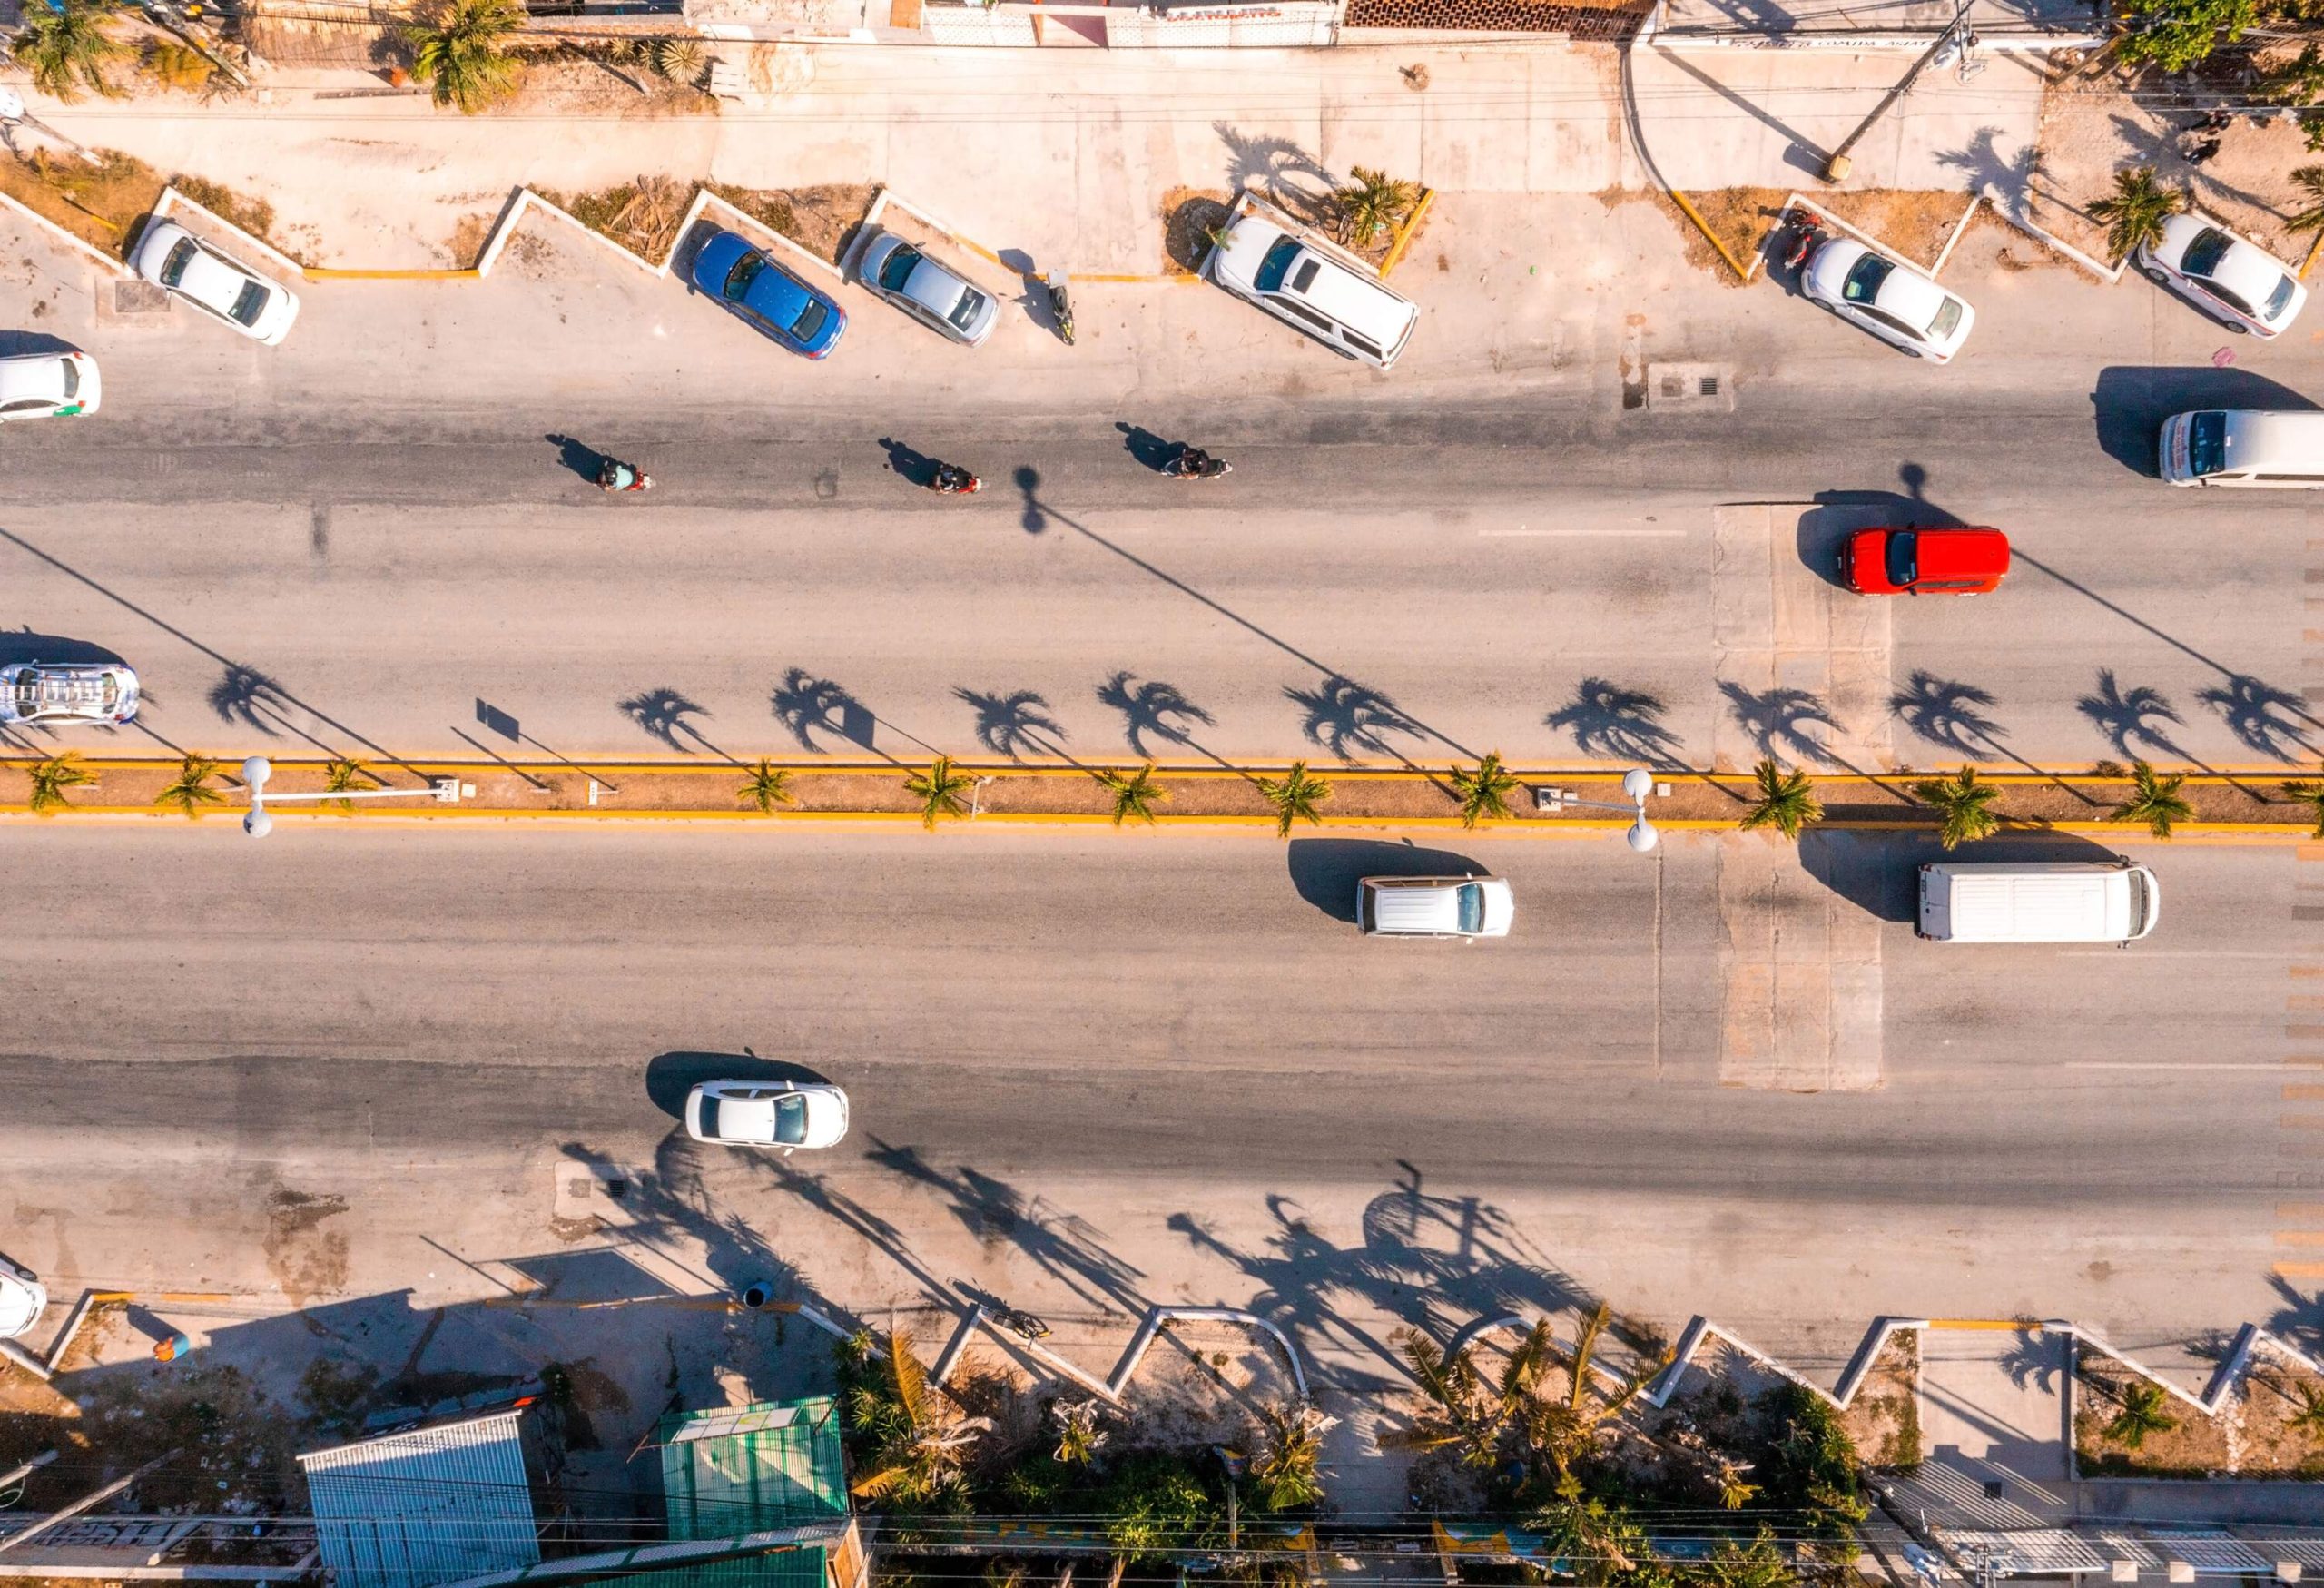 Cars travel on a two-lane highway lined with palm trees and parked cars.